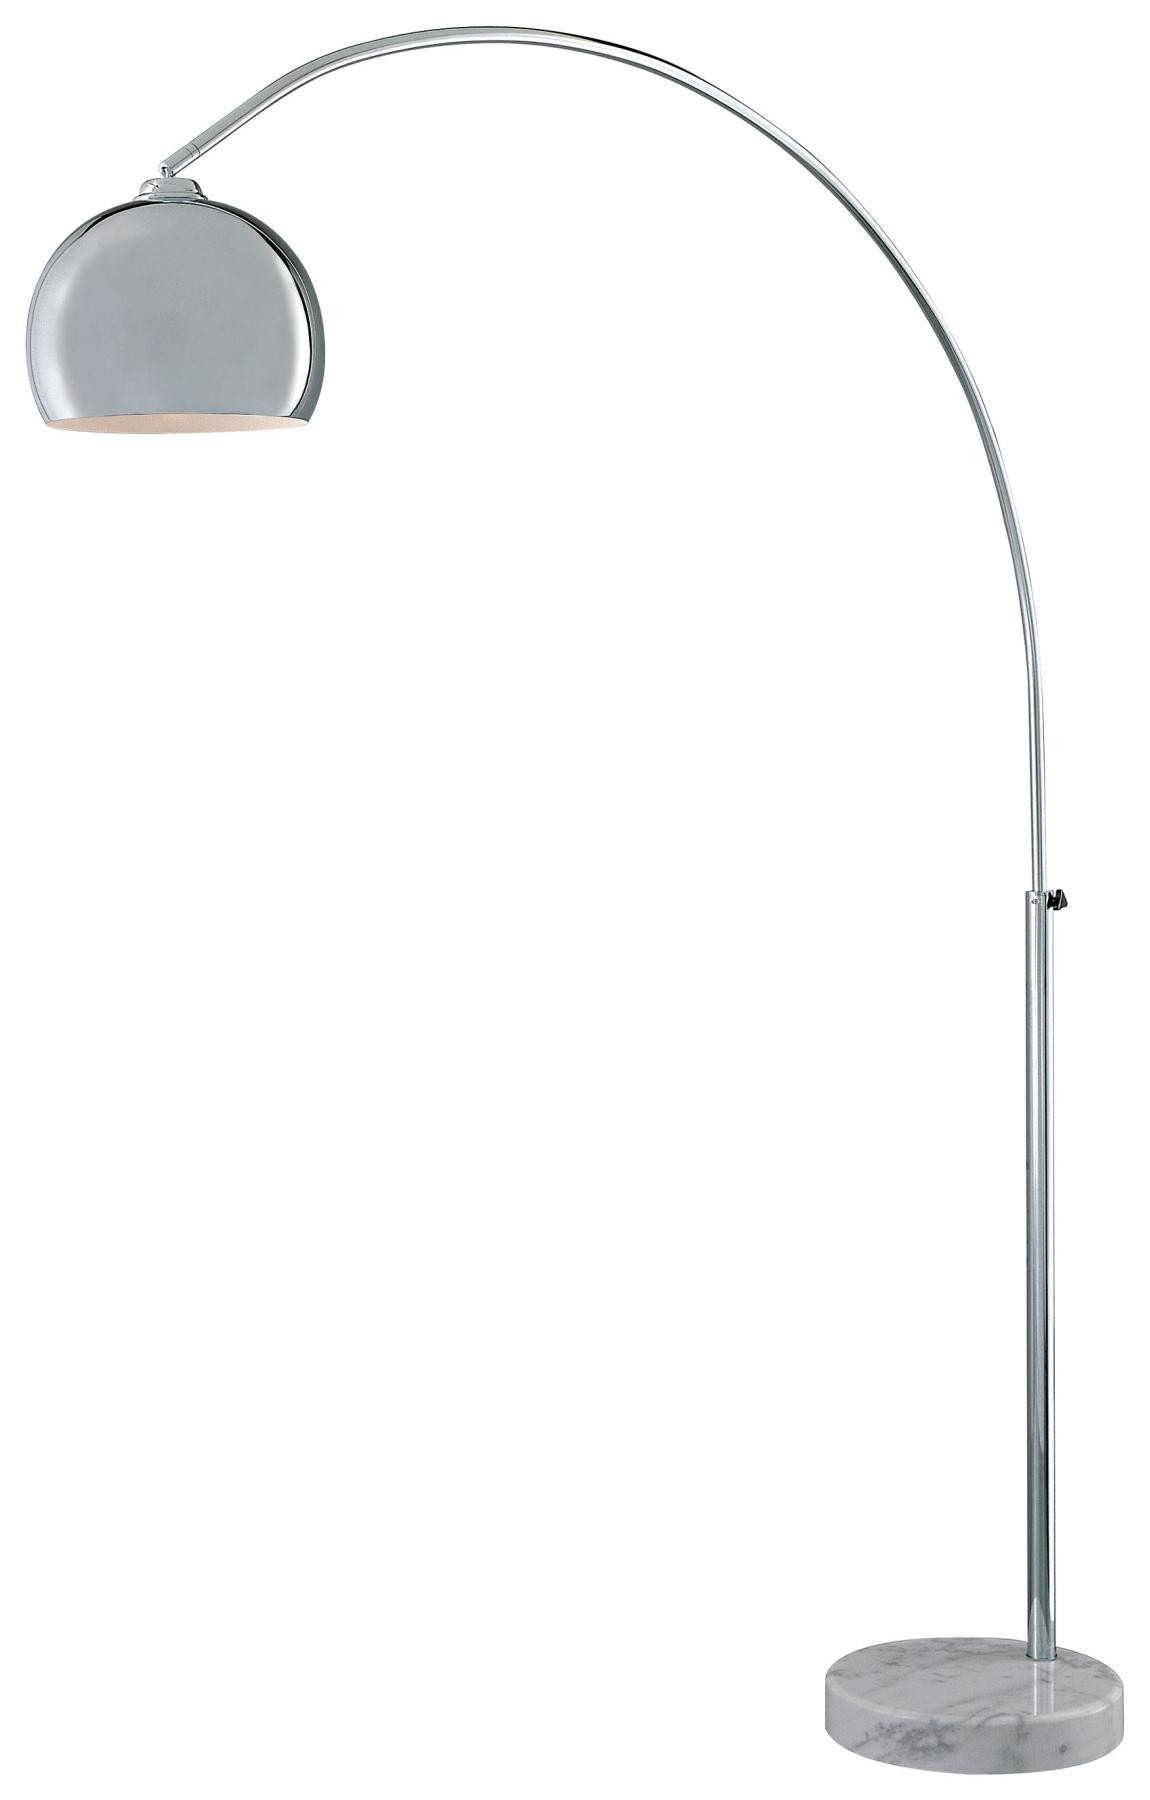 George Kovacs P053 077 Arc Floor Lamp In Chrome Withwhite with regard to sizing 1150 X 1800